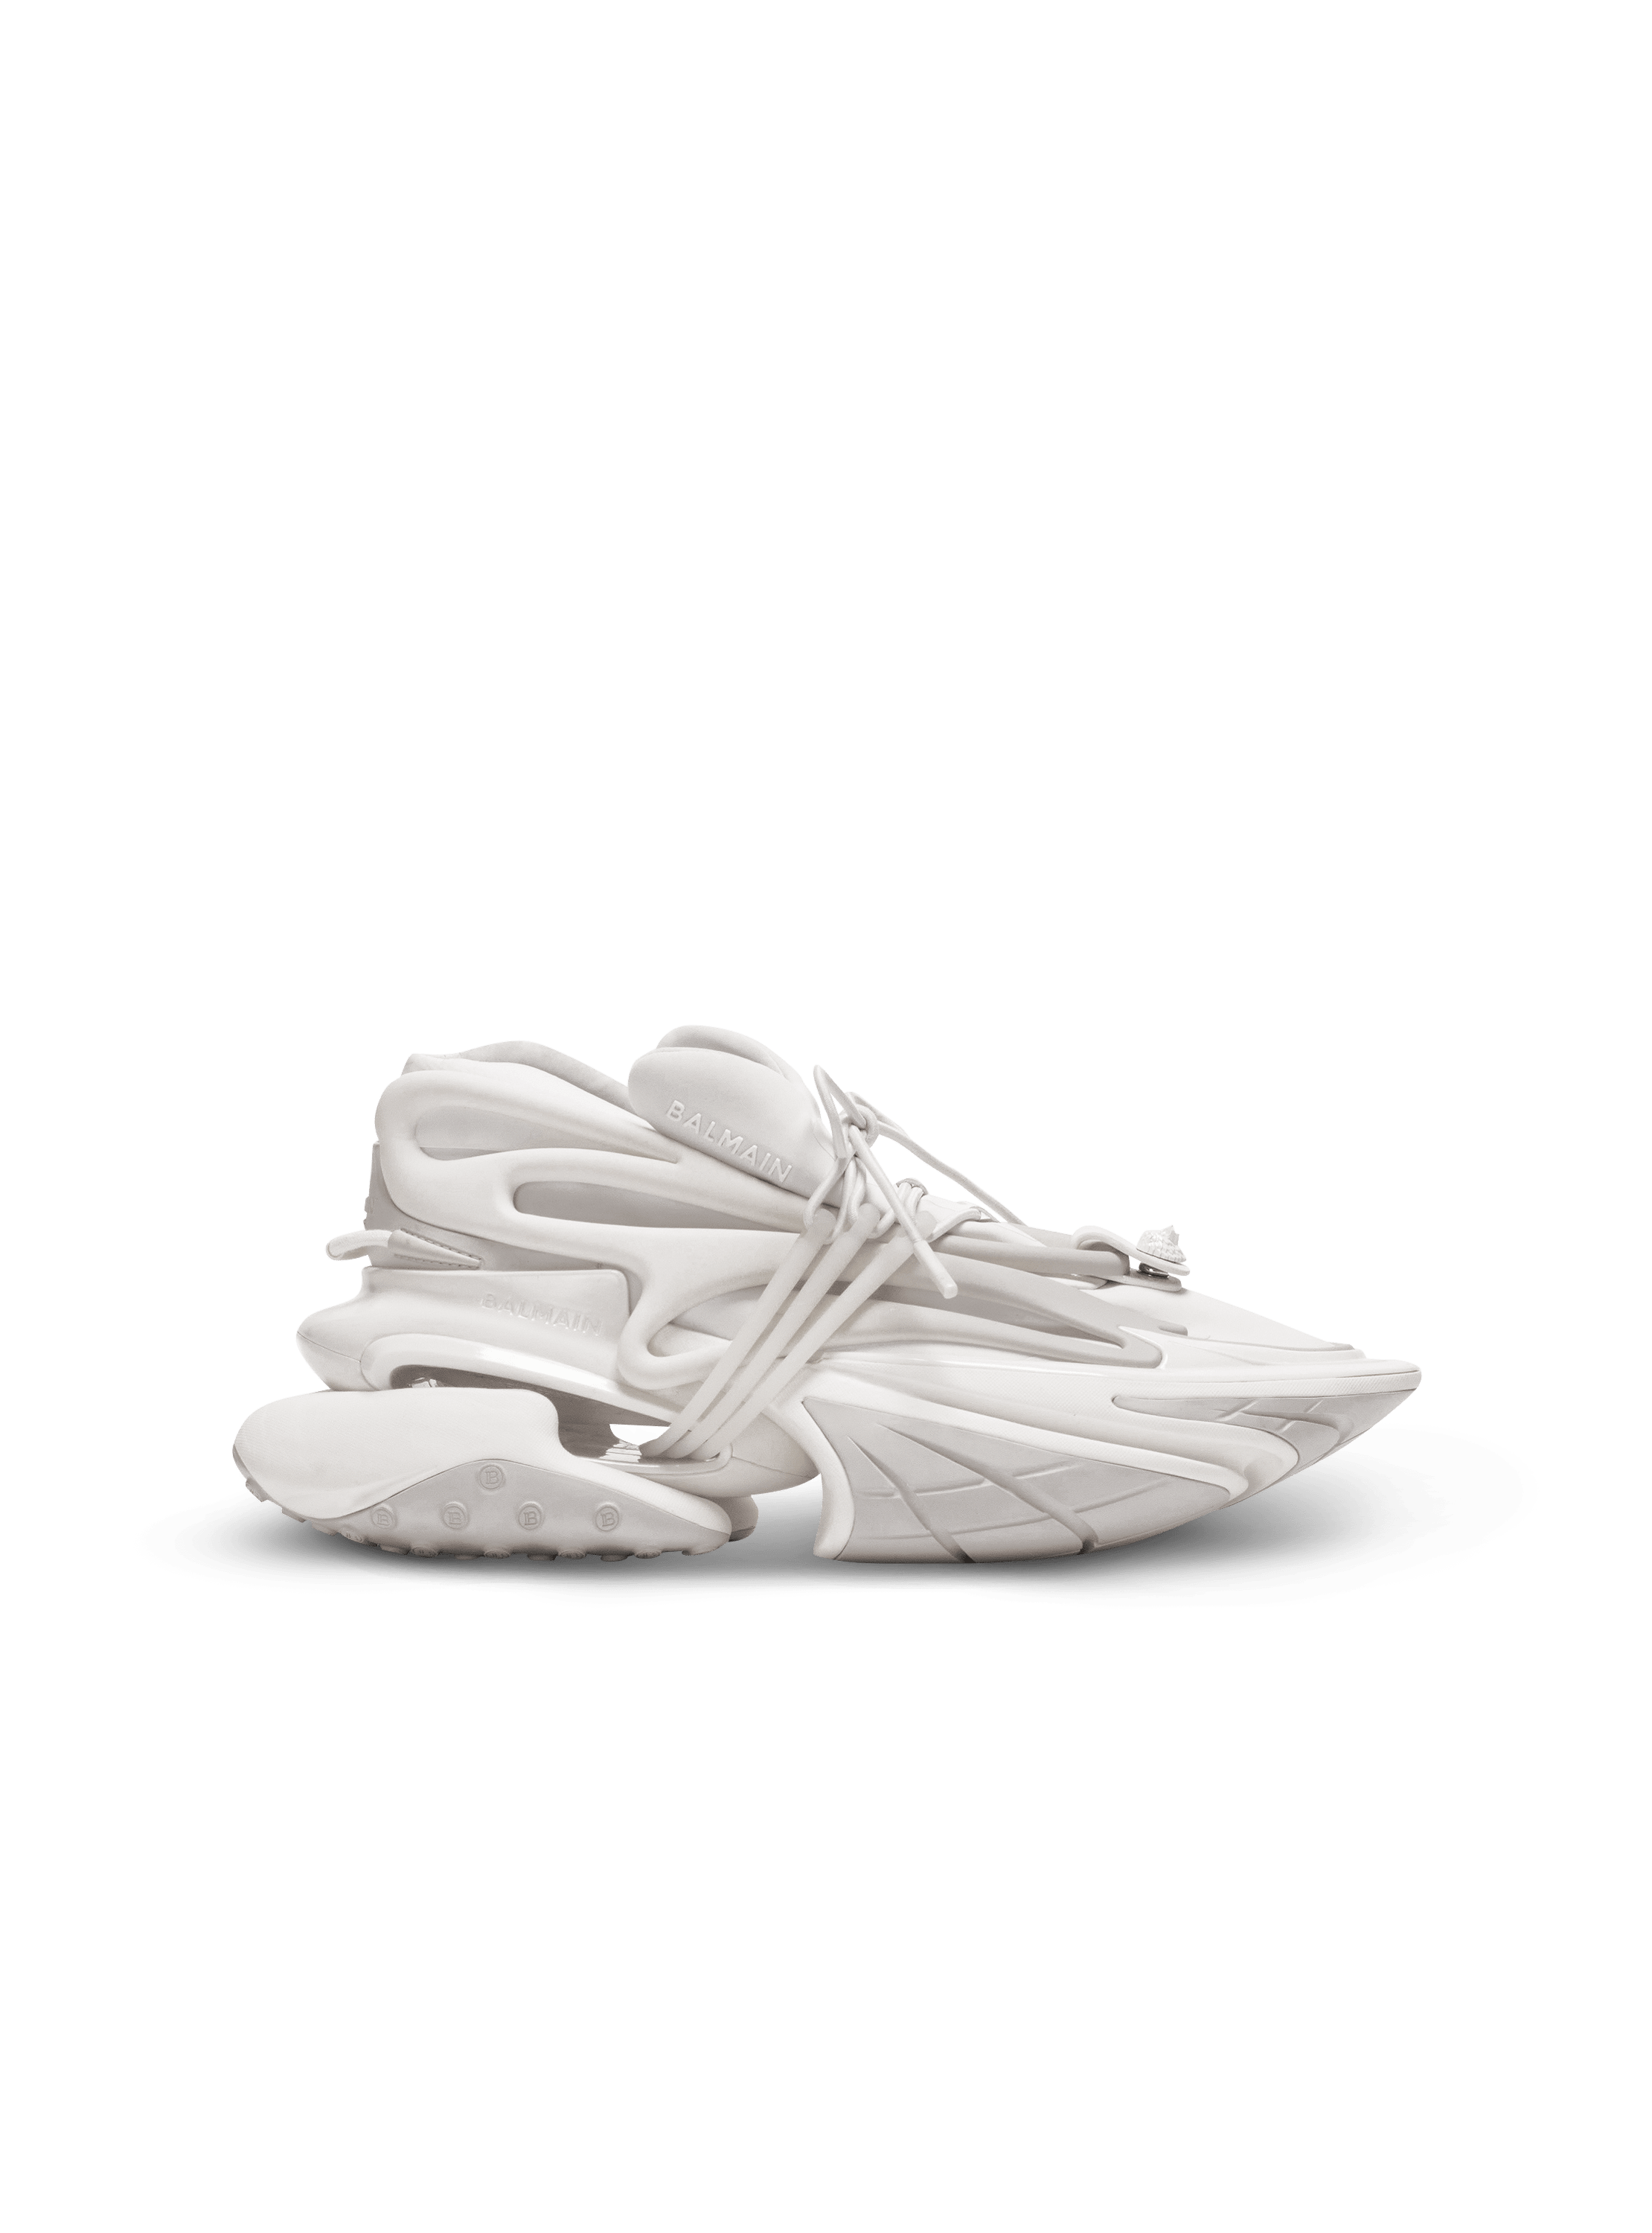 Balenciaga Sneaker Styling and Sizing Guide